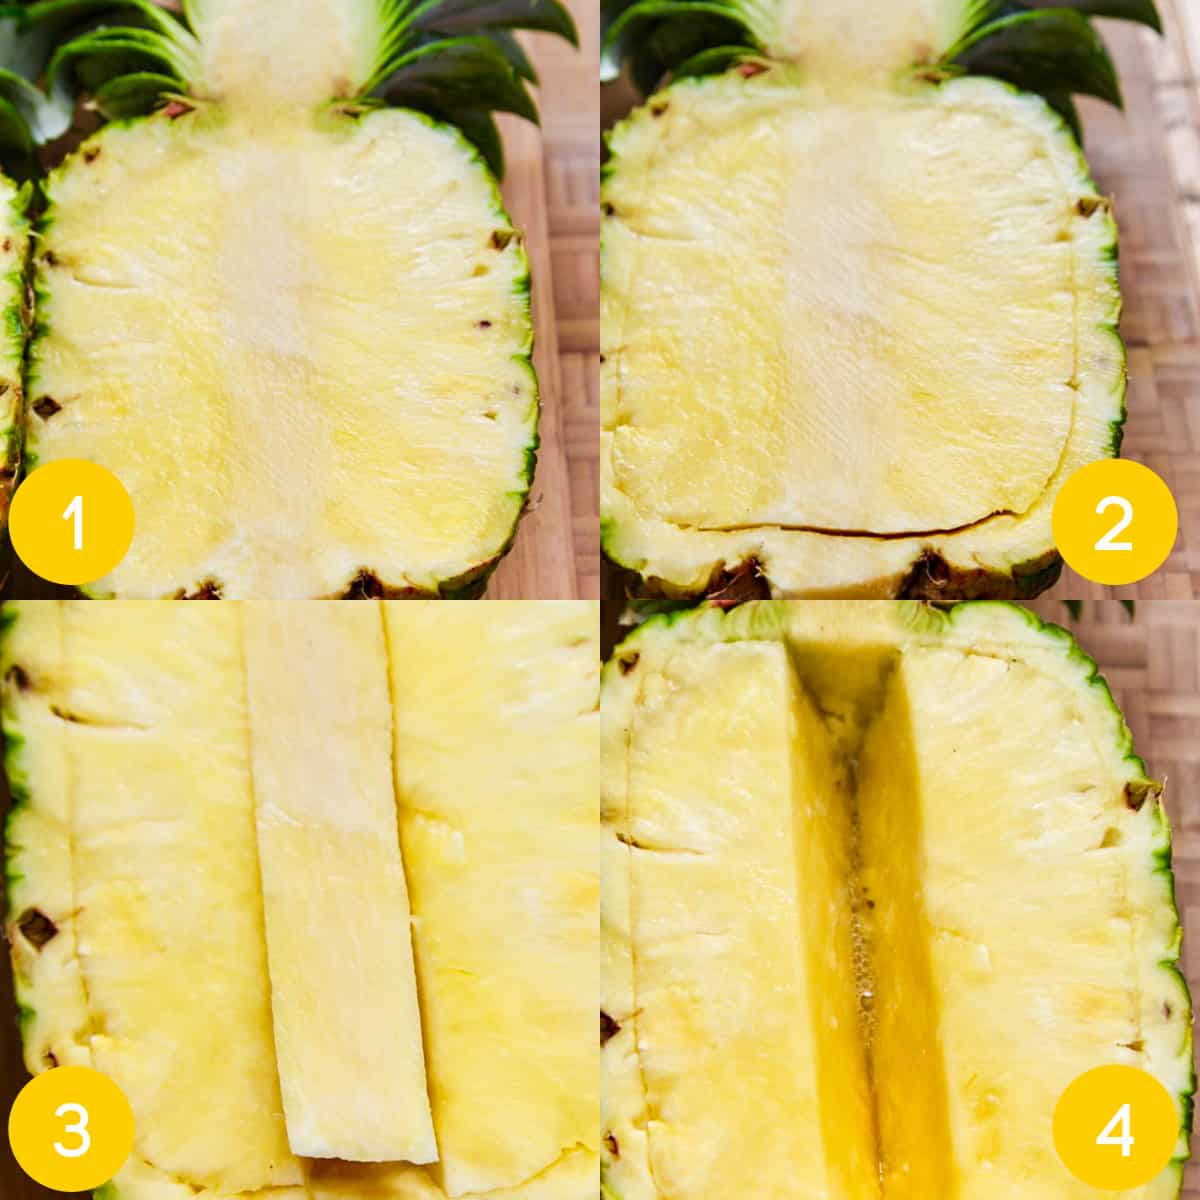 Steps 1-4 for how to cut pineapple bowls for use in recipes or to eat as a snack.